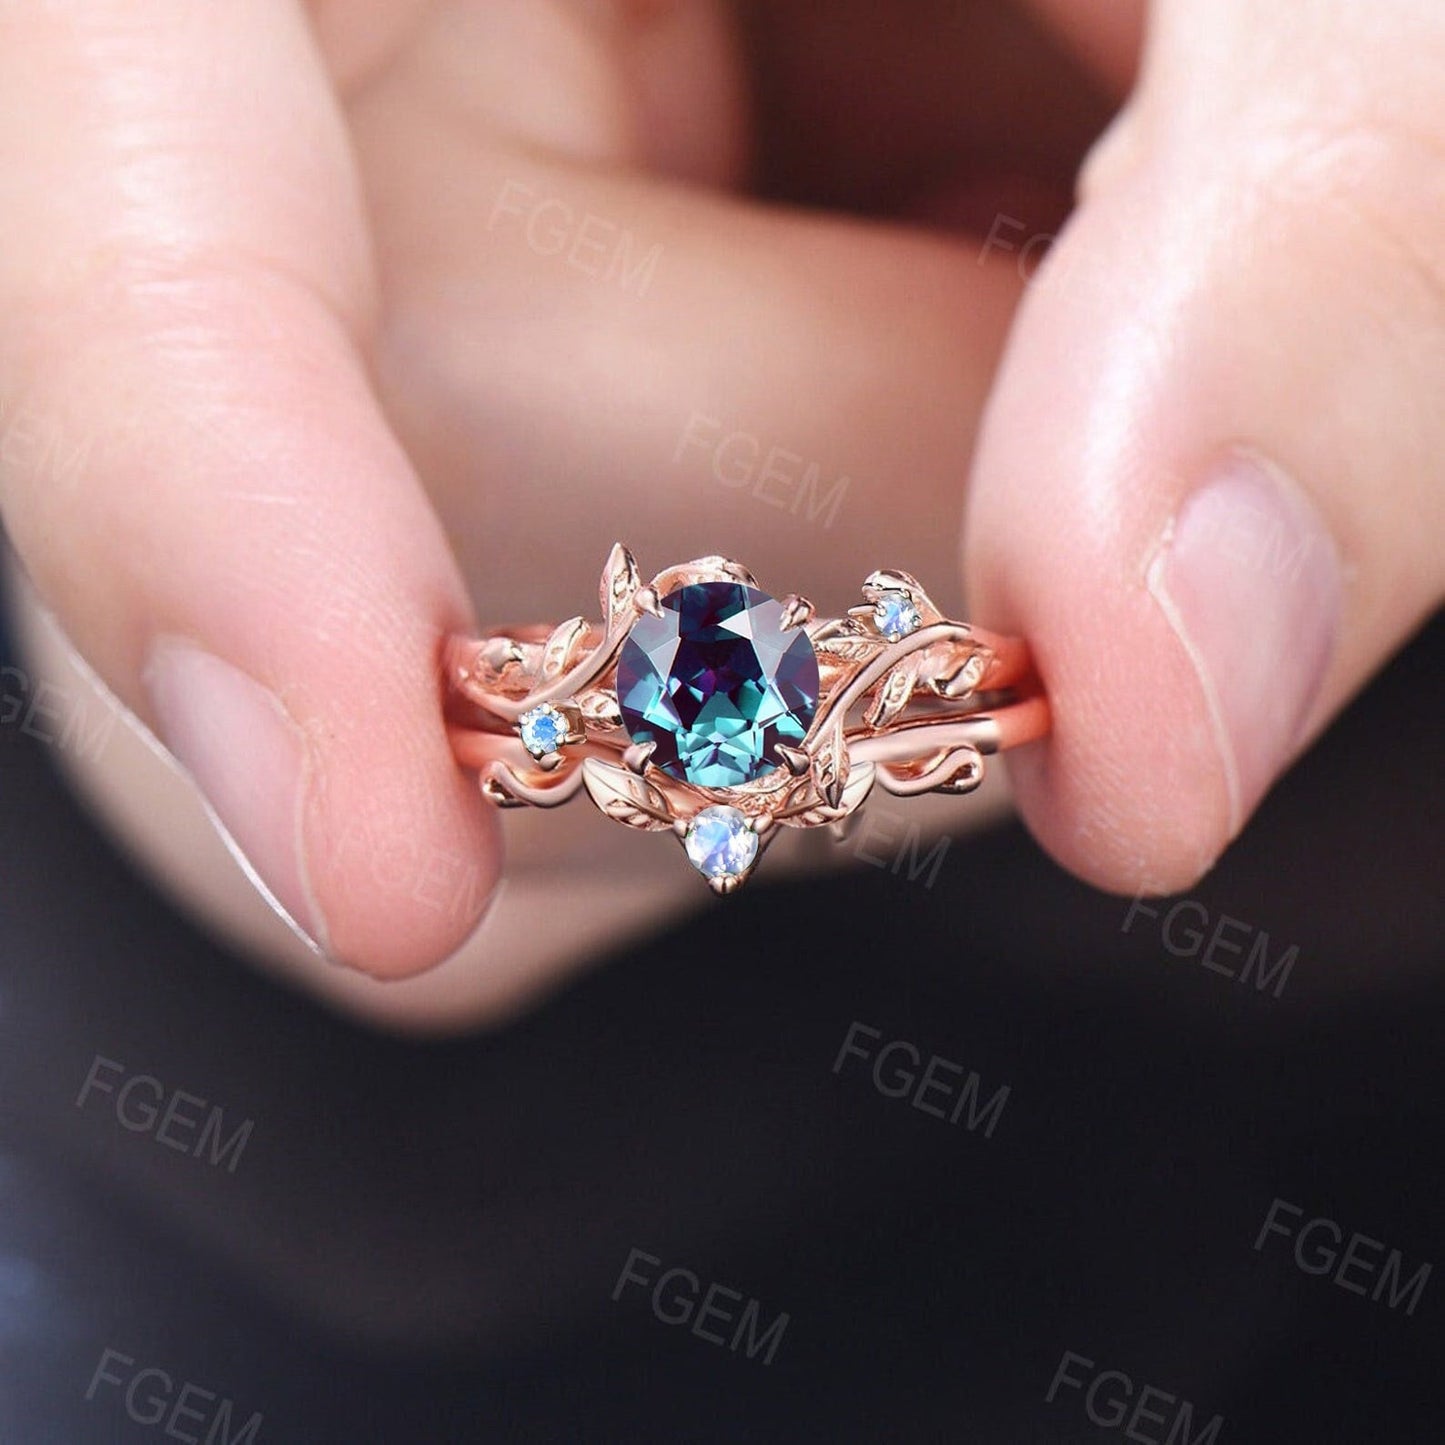 1ct Round Cut Nature Inspired Alexandrite Ring Set Moonstone Wedding Ring Leaf Vine Ring Set Unique Branch Design Promise Anniversary Gifts